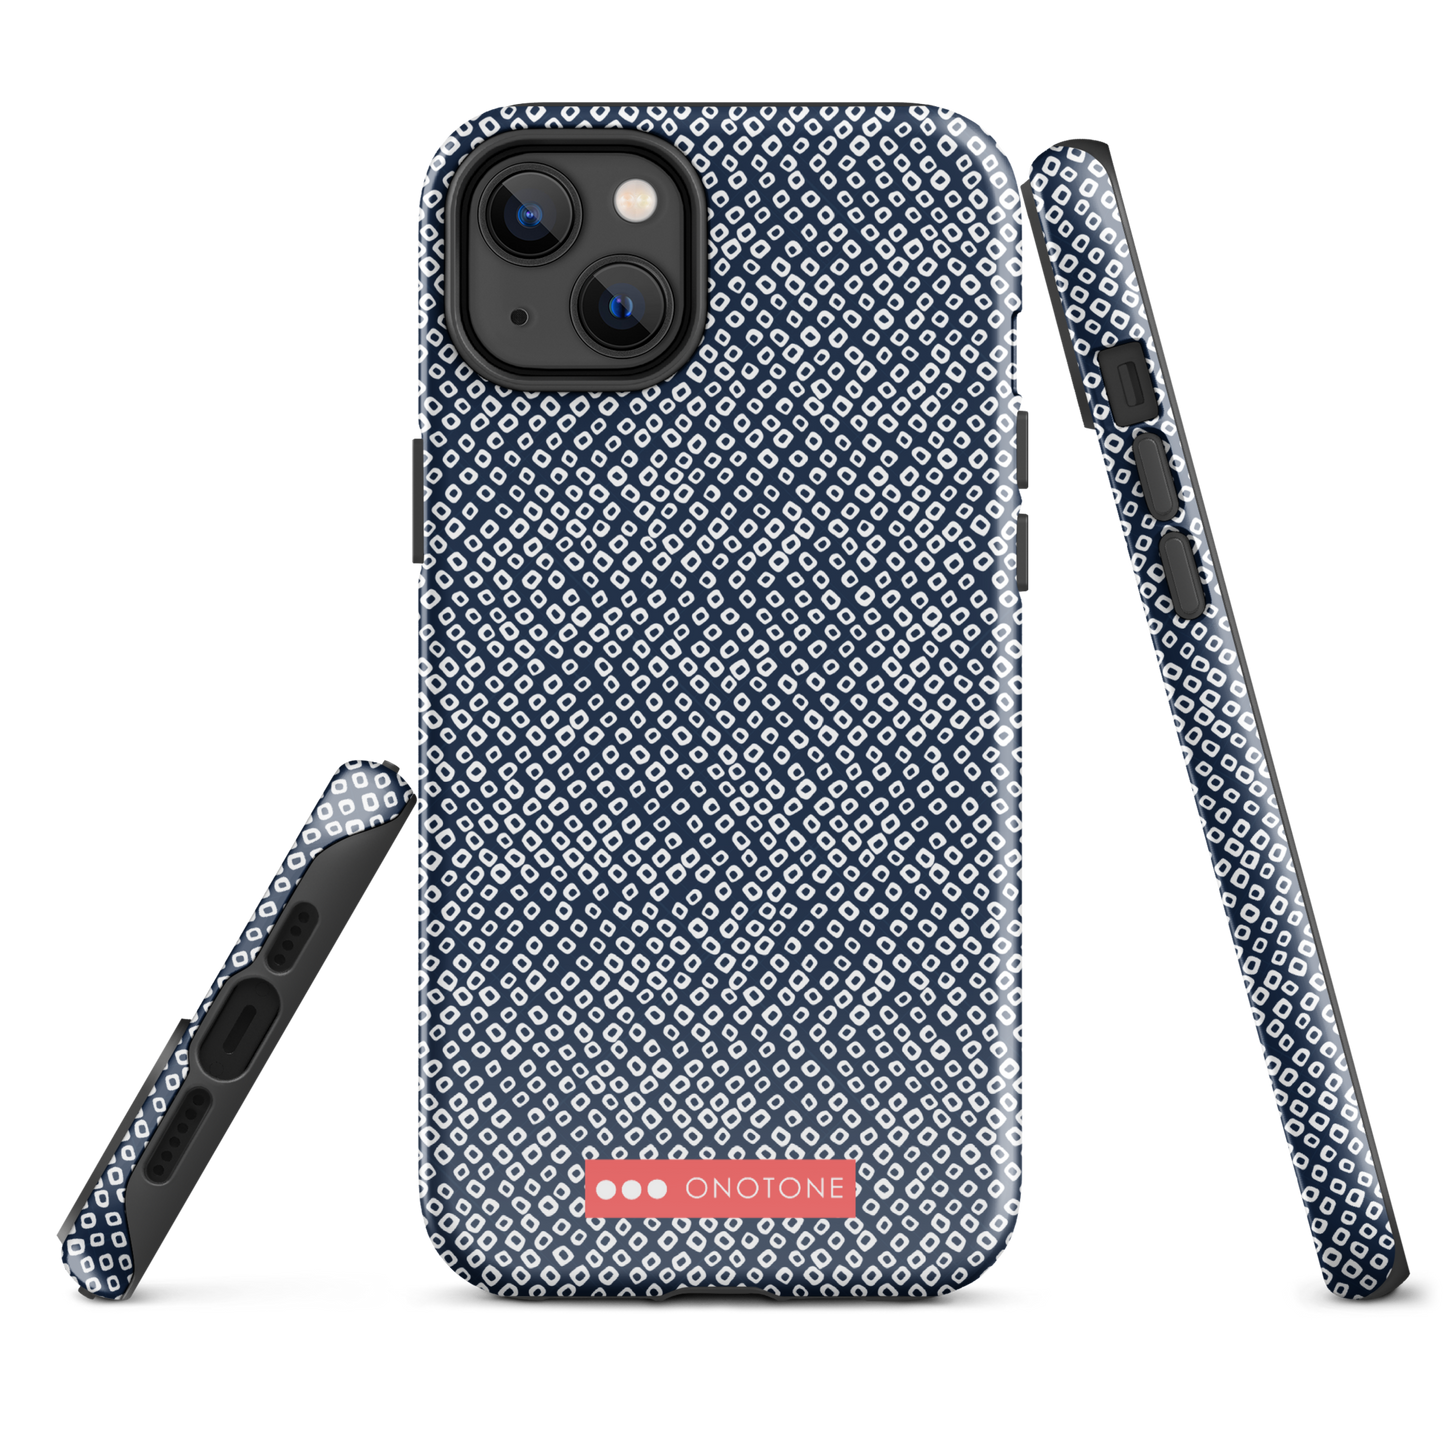 Japanese design indigo iPhone® Case with dotted patterns